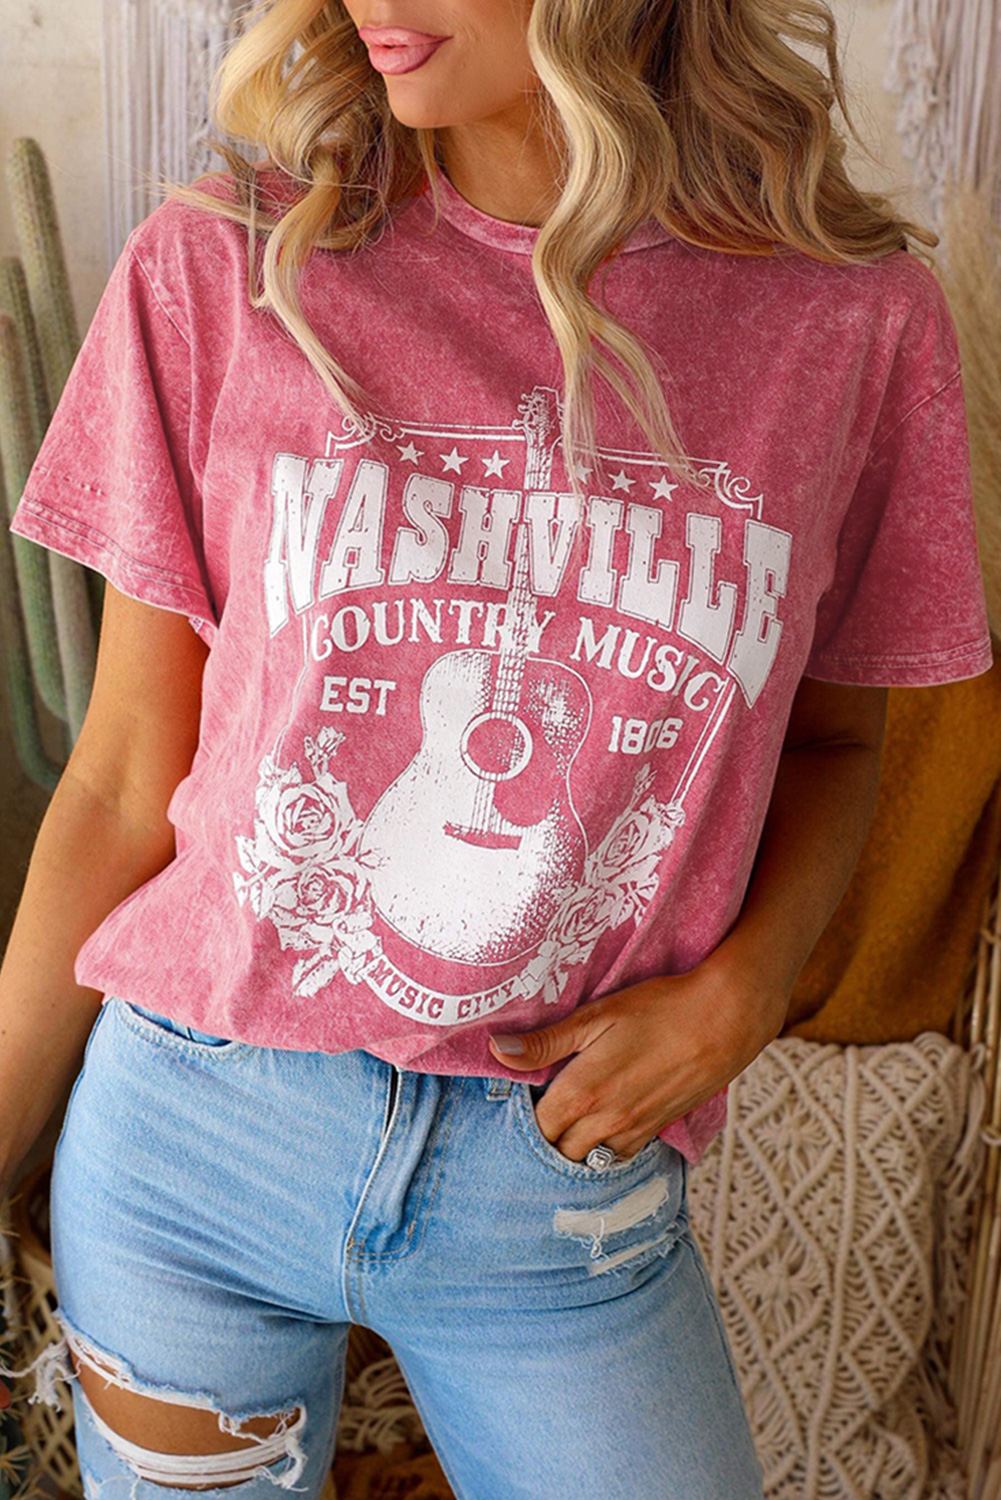 Shewin Wholesale Boutique Red Nashville Rock Band T Shirt VINTAGE Washed Tee